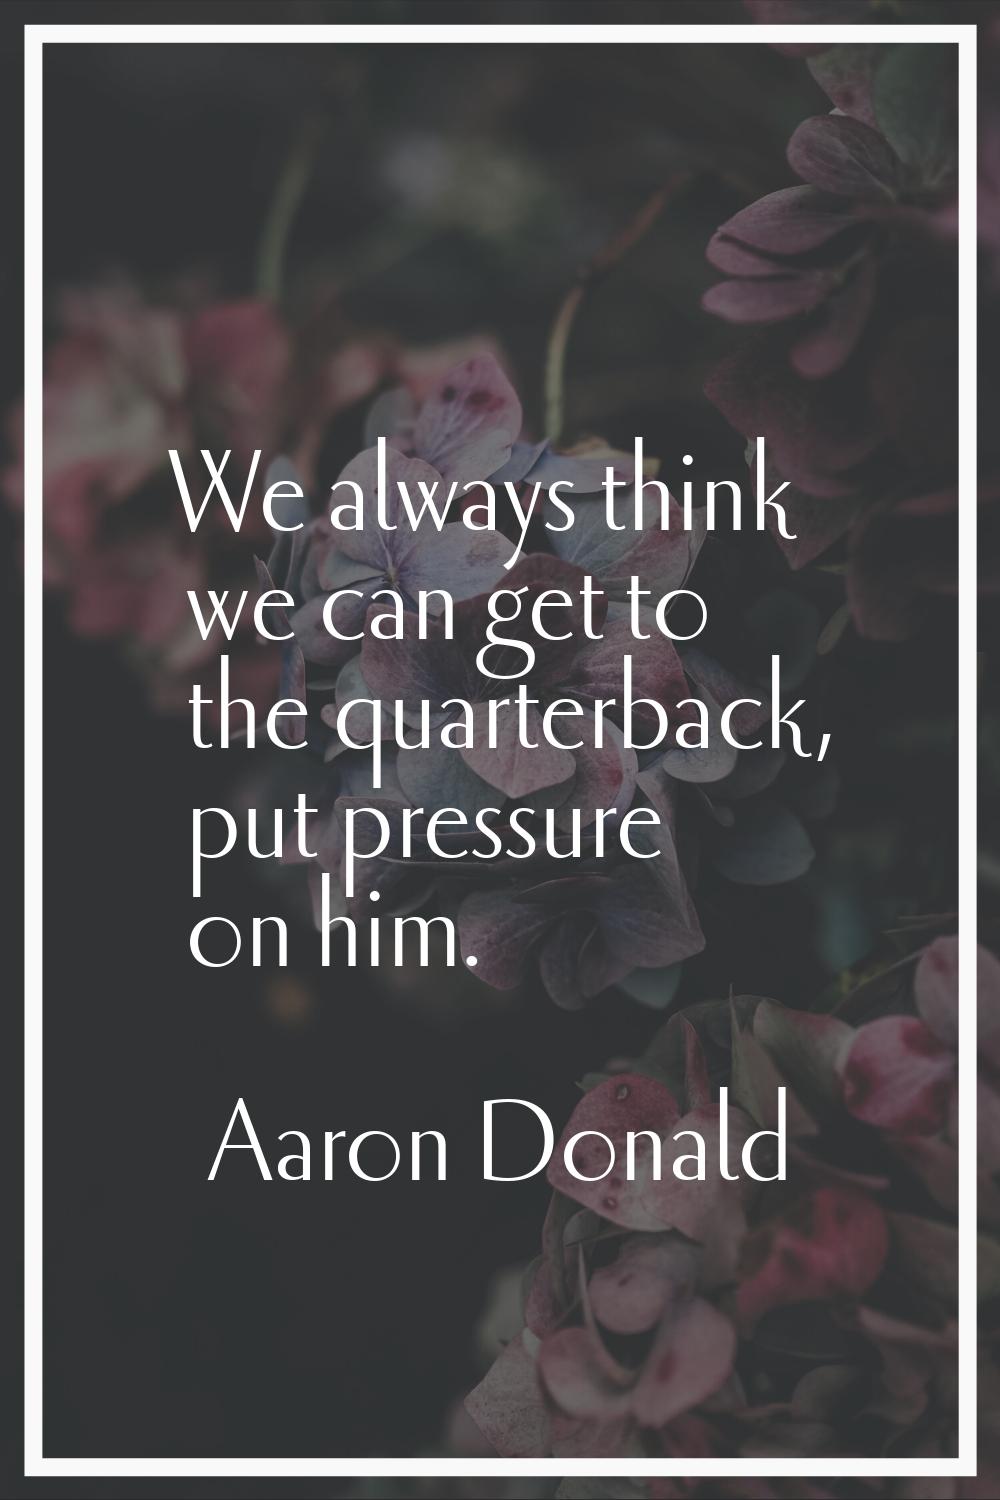 We always think we can get to the quarterback, put pressure on him.